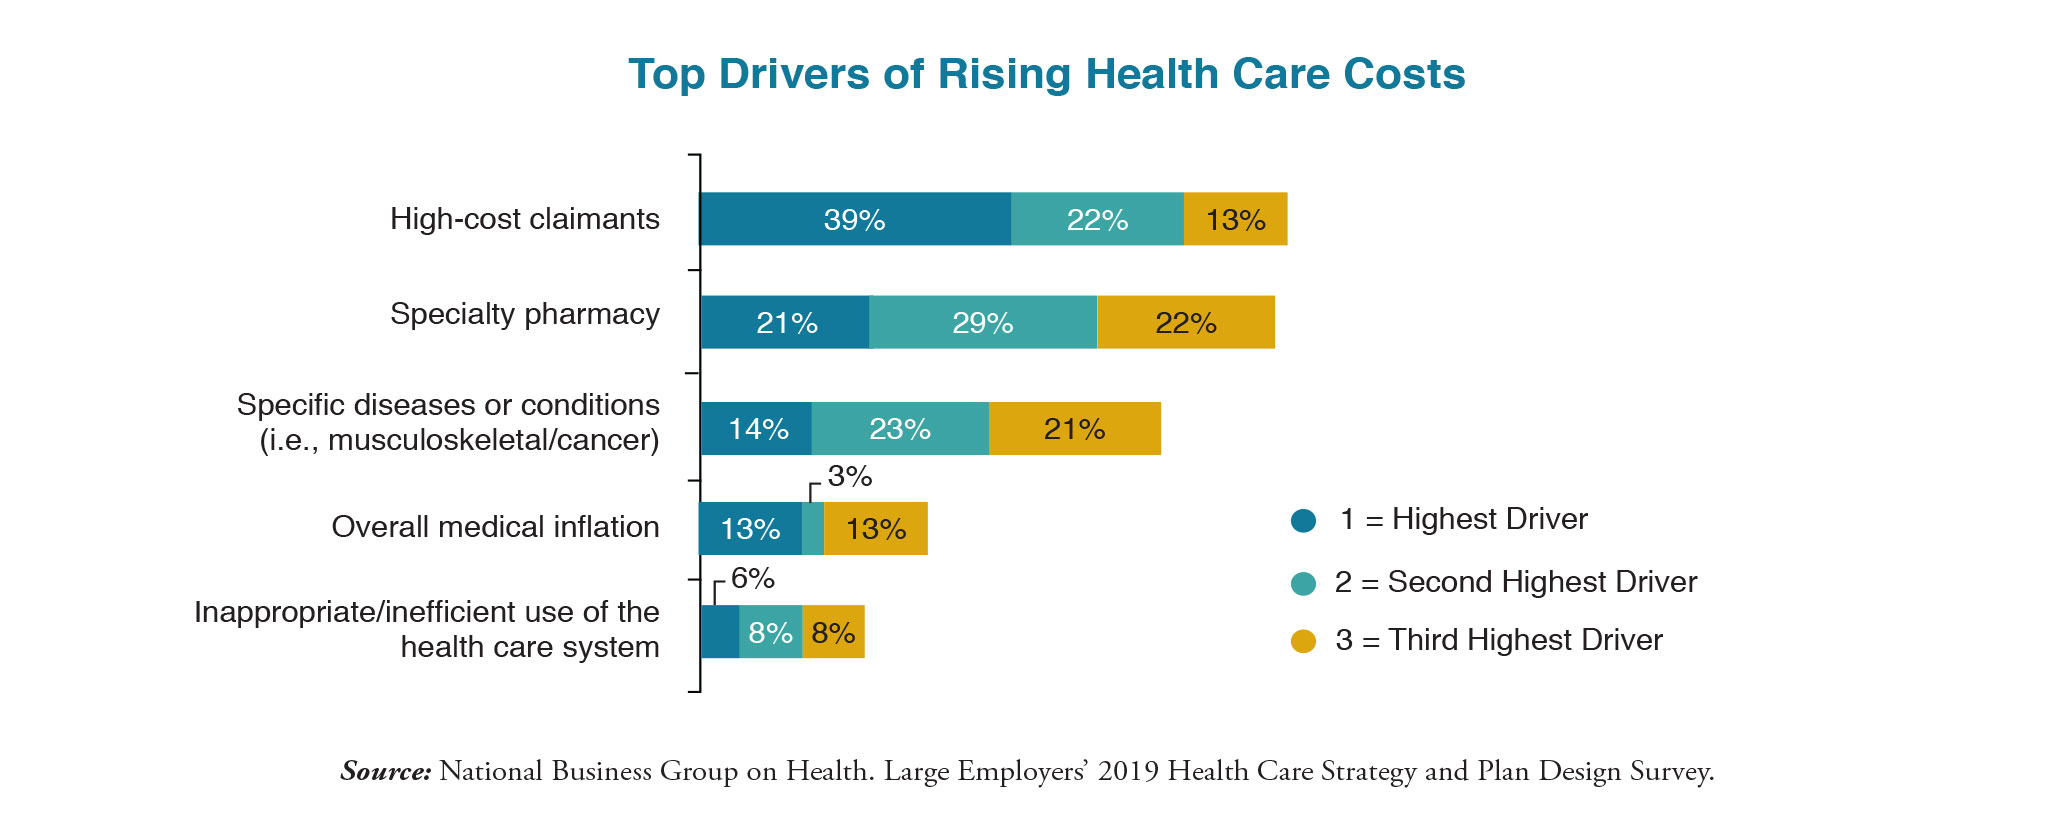 Top Drivers of Rising Health Care Costs